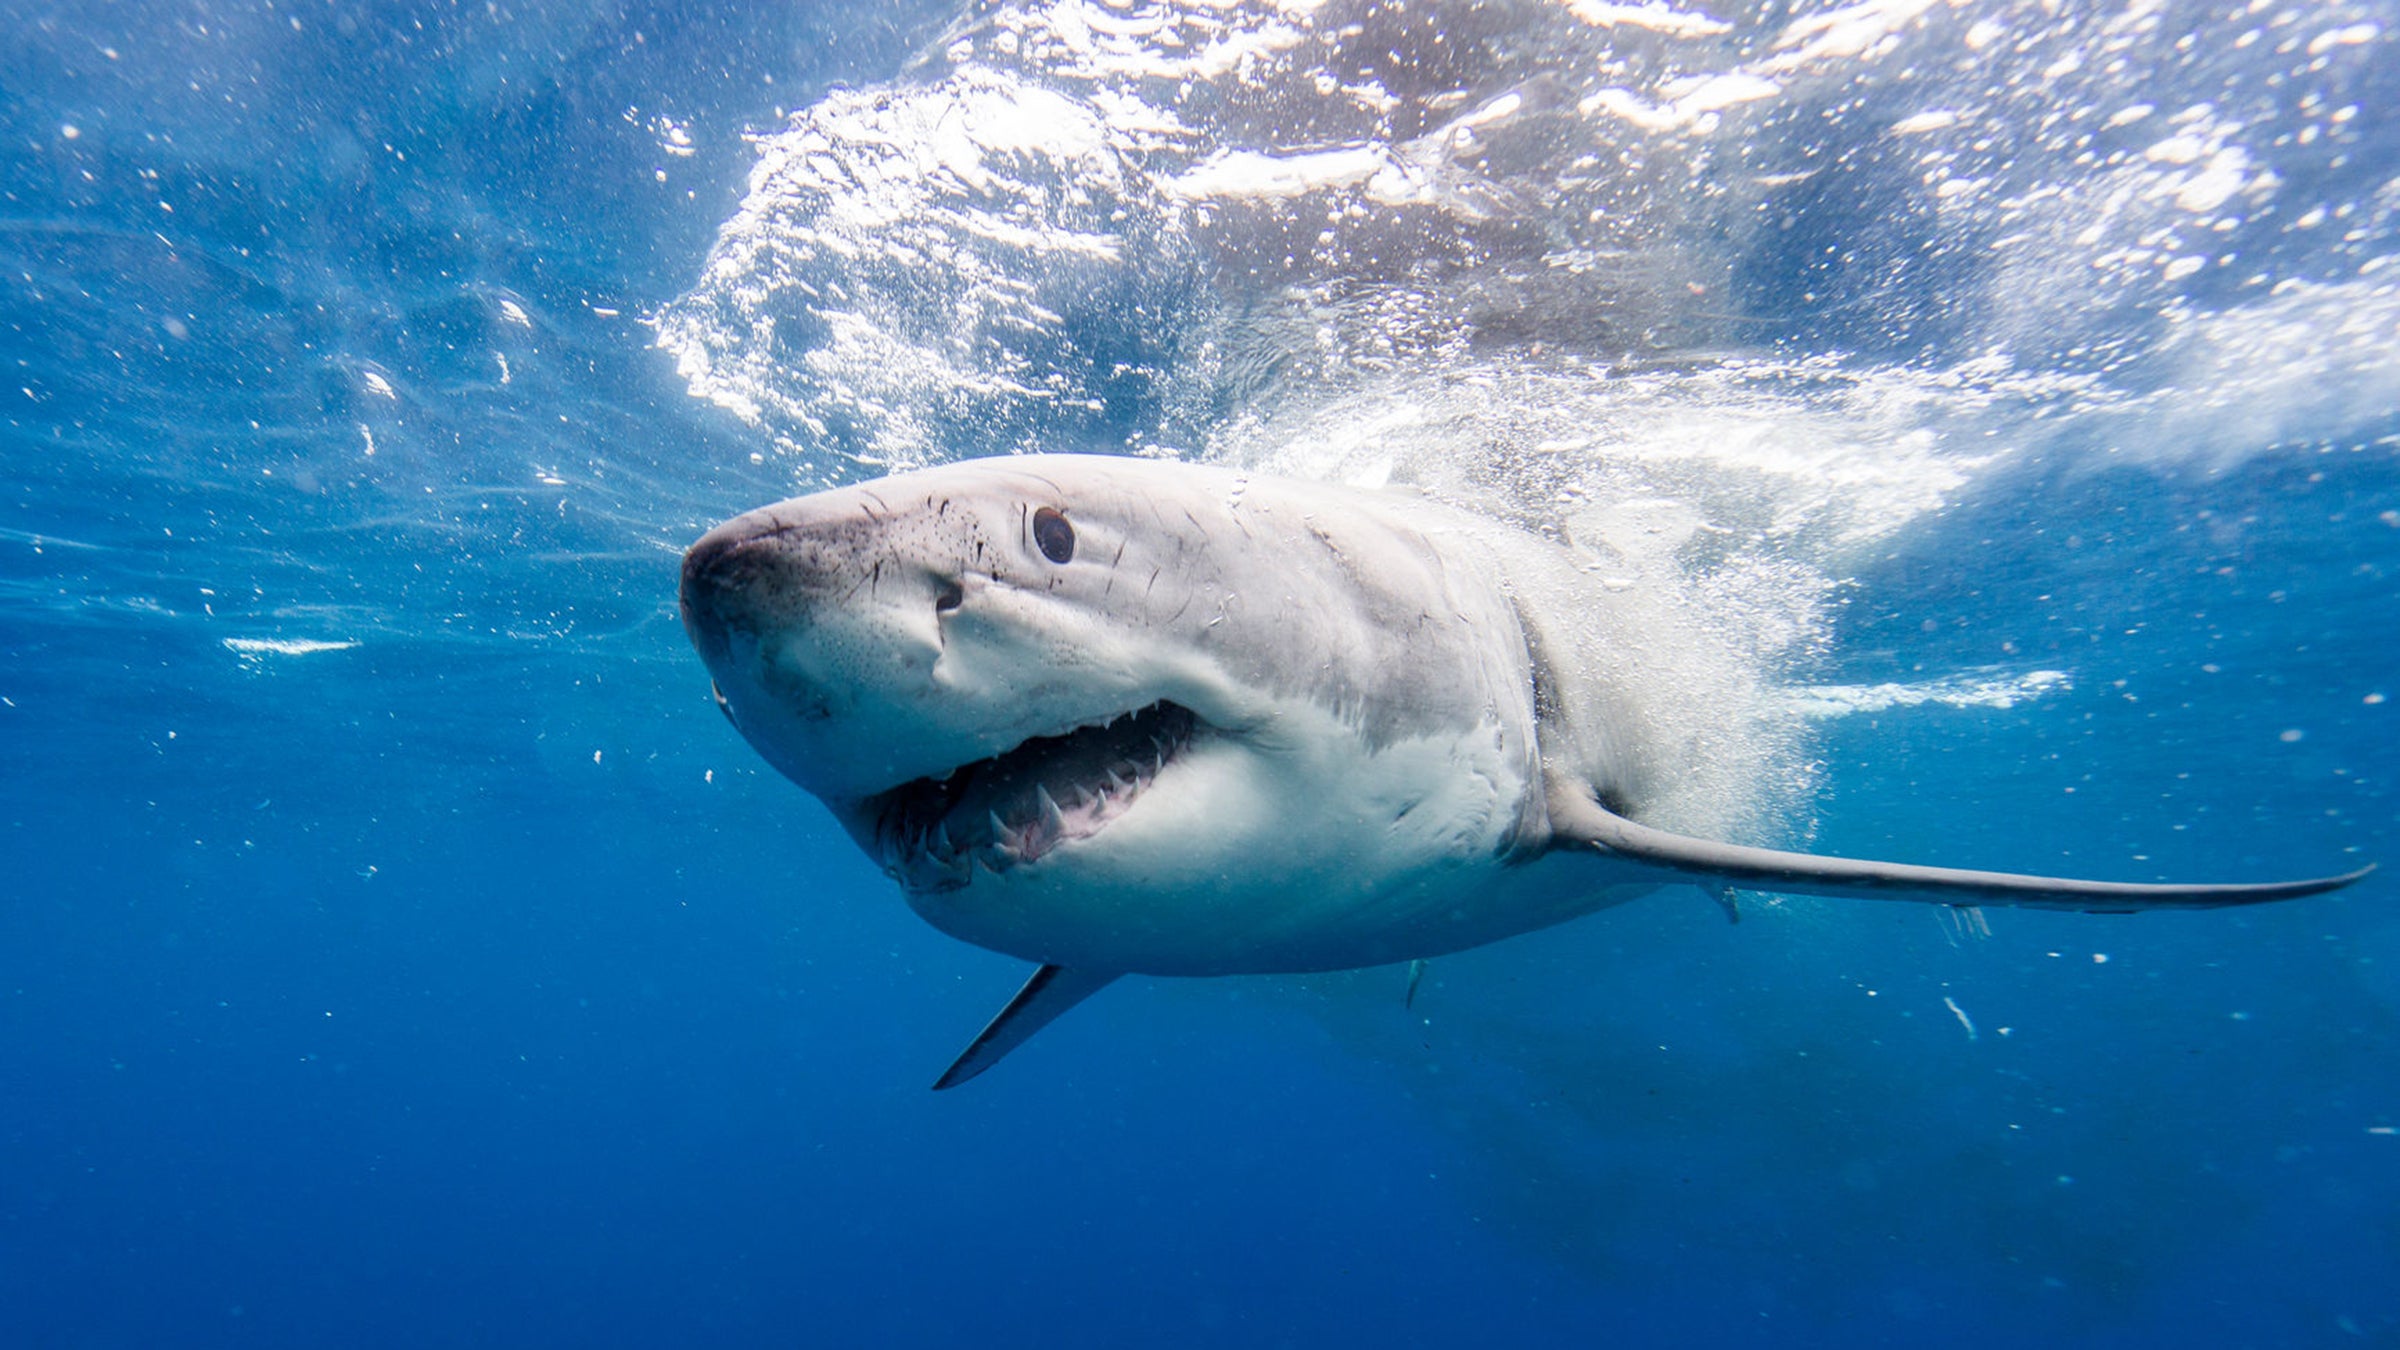 This is the terrifying view you'd see just before being eaten by a shark